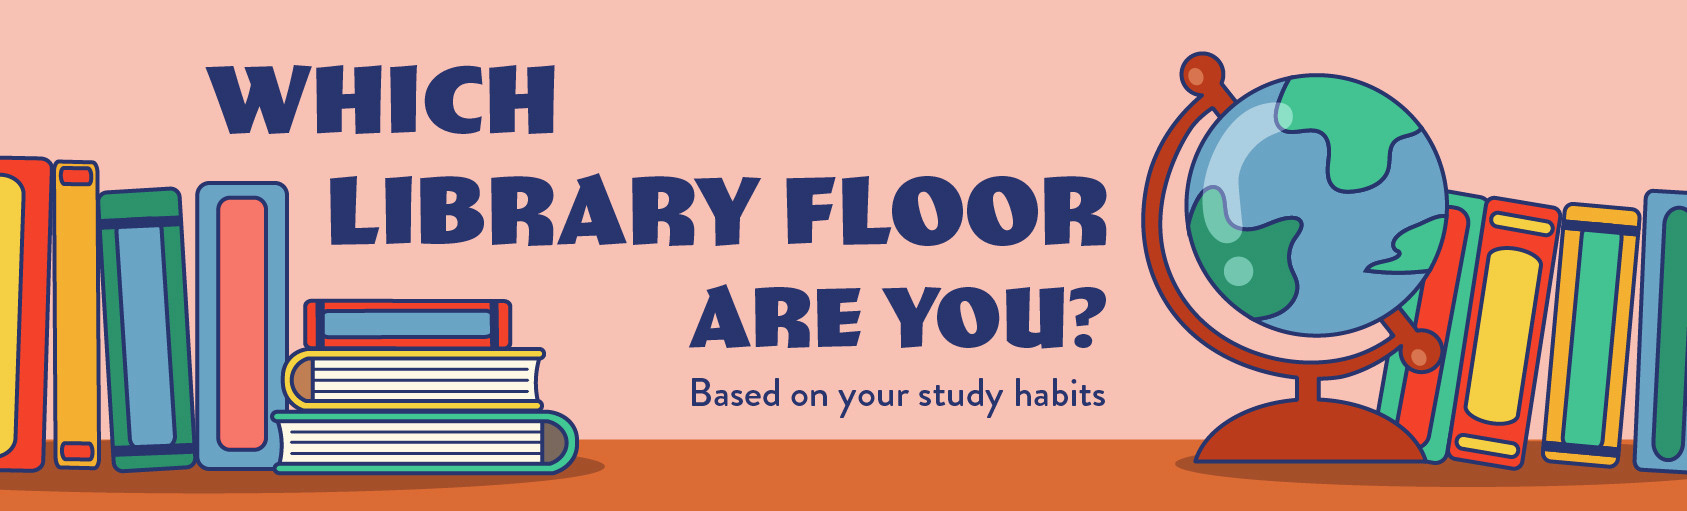 Quiz: Which Library Floor Are You Based on Your Study Habits banner